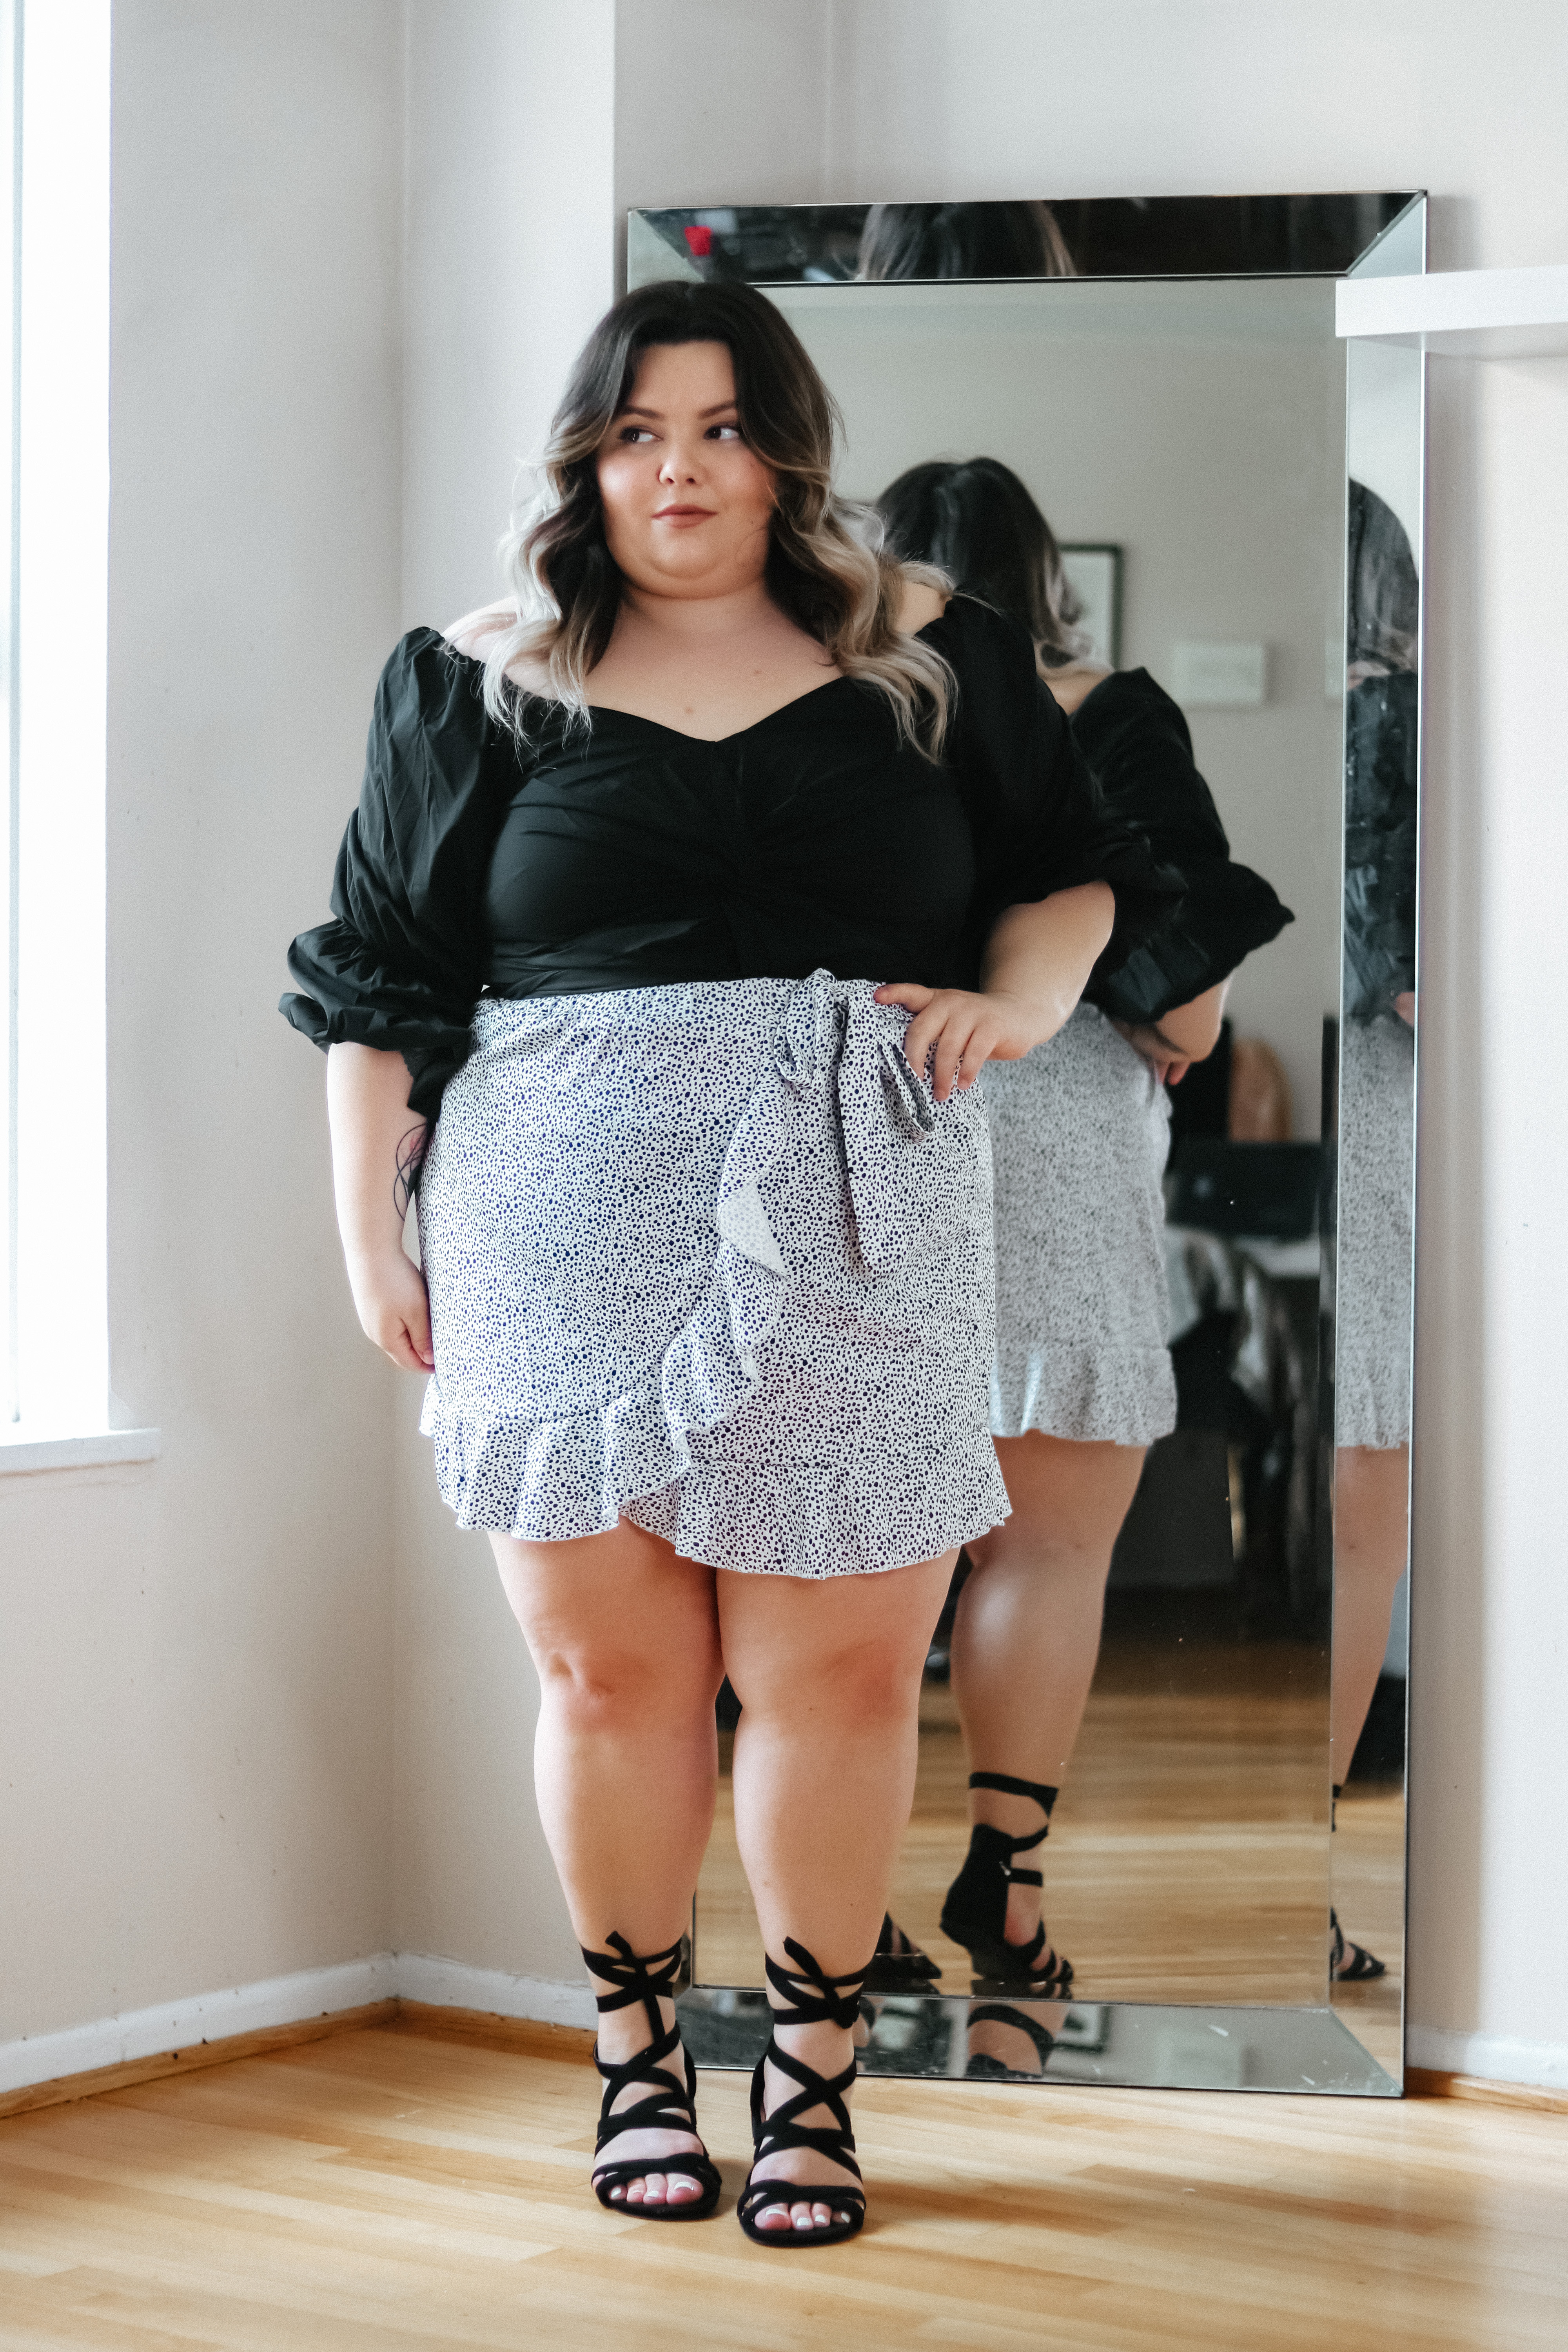 Chicago Plus Size Petite Fashion Blogger Natalie in the City, reviews SHEIN's mini skirts and plus size clothing.